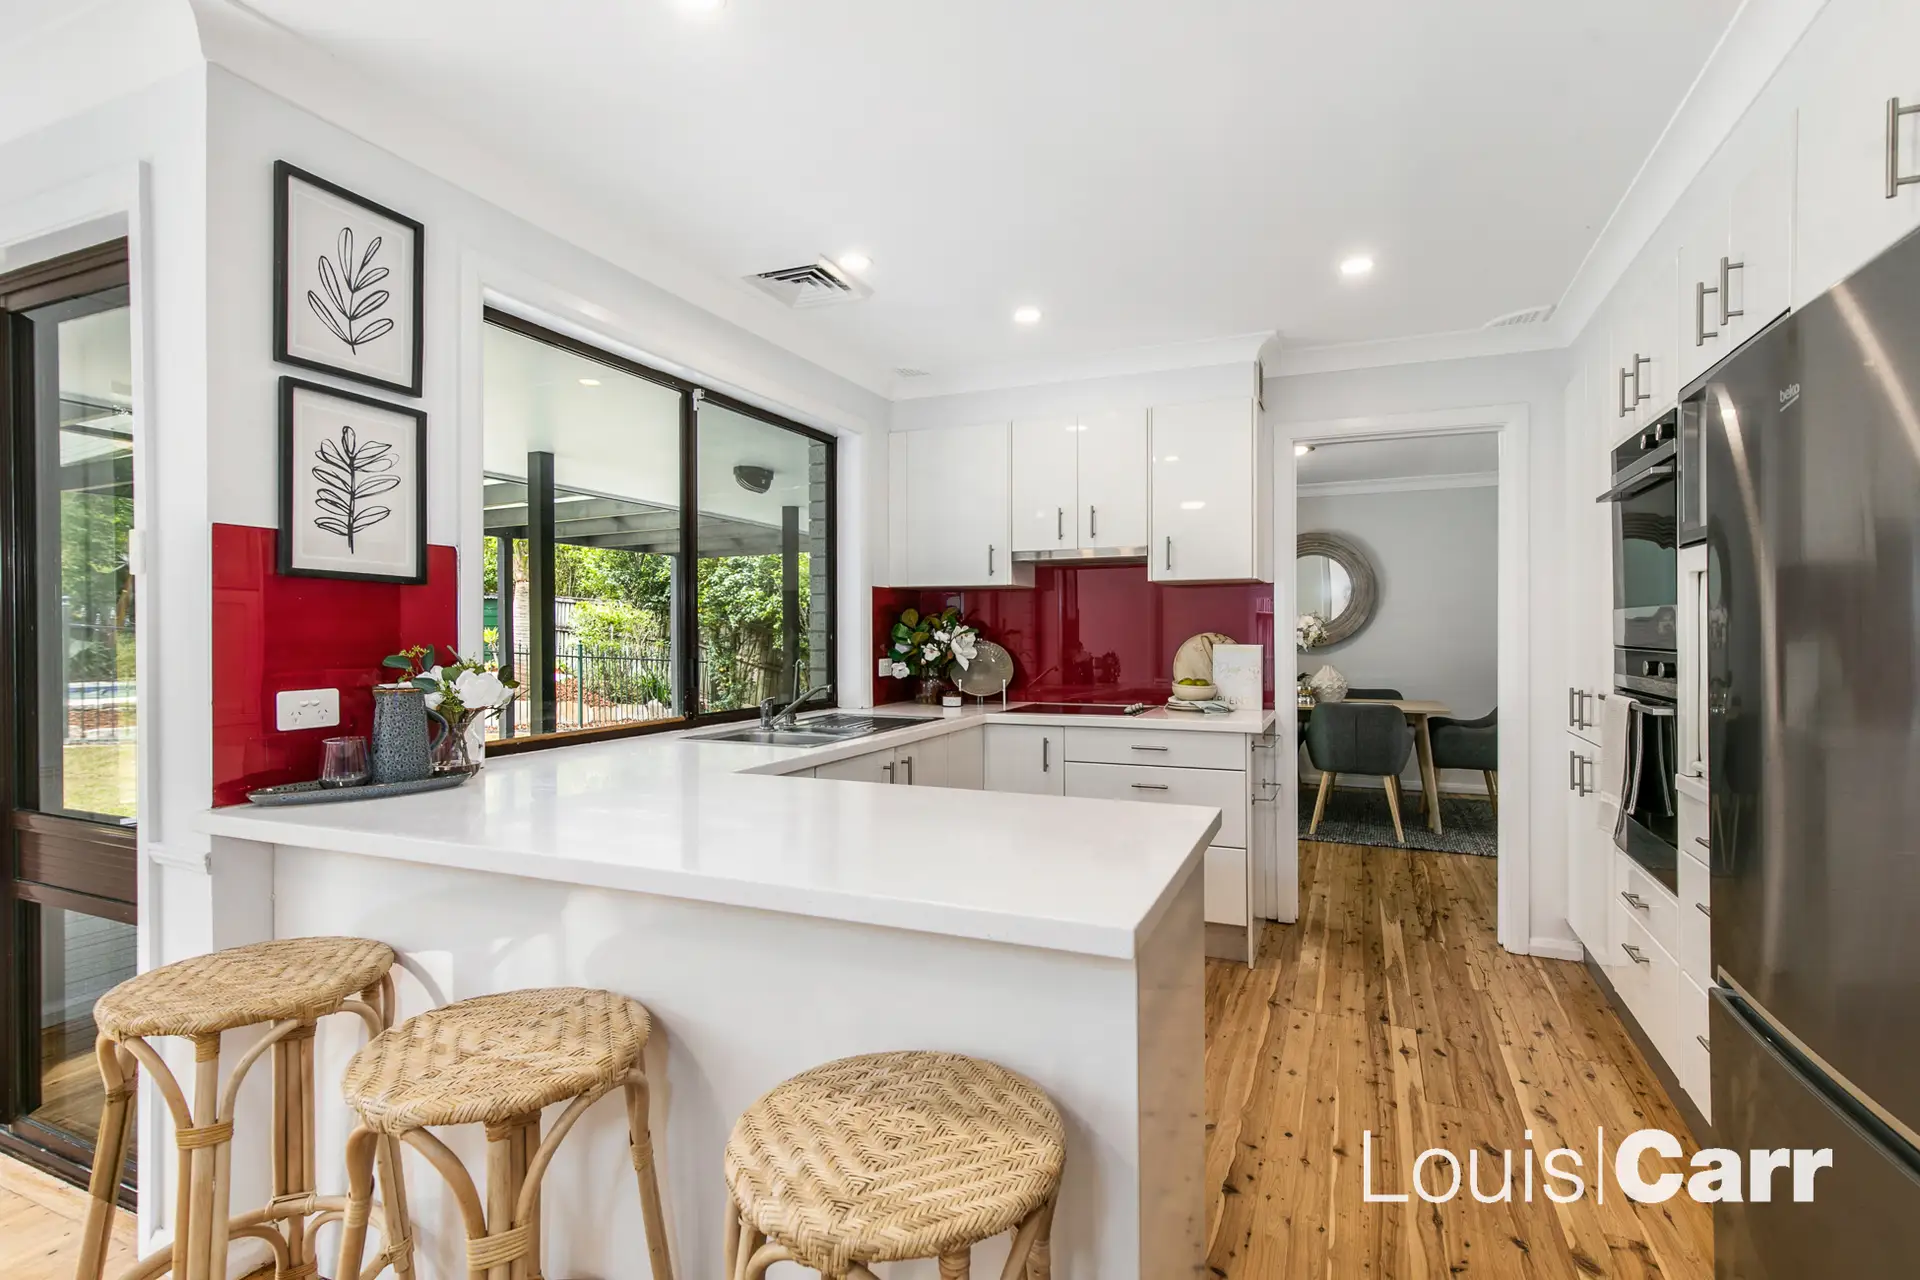 Photo #5: 12 Radley Place, Cherrybrook - Sold by Louis Carr Real Estate